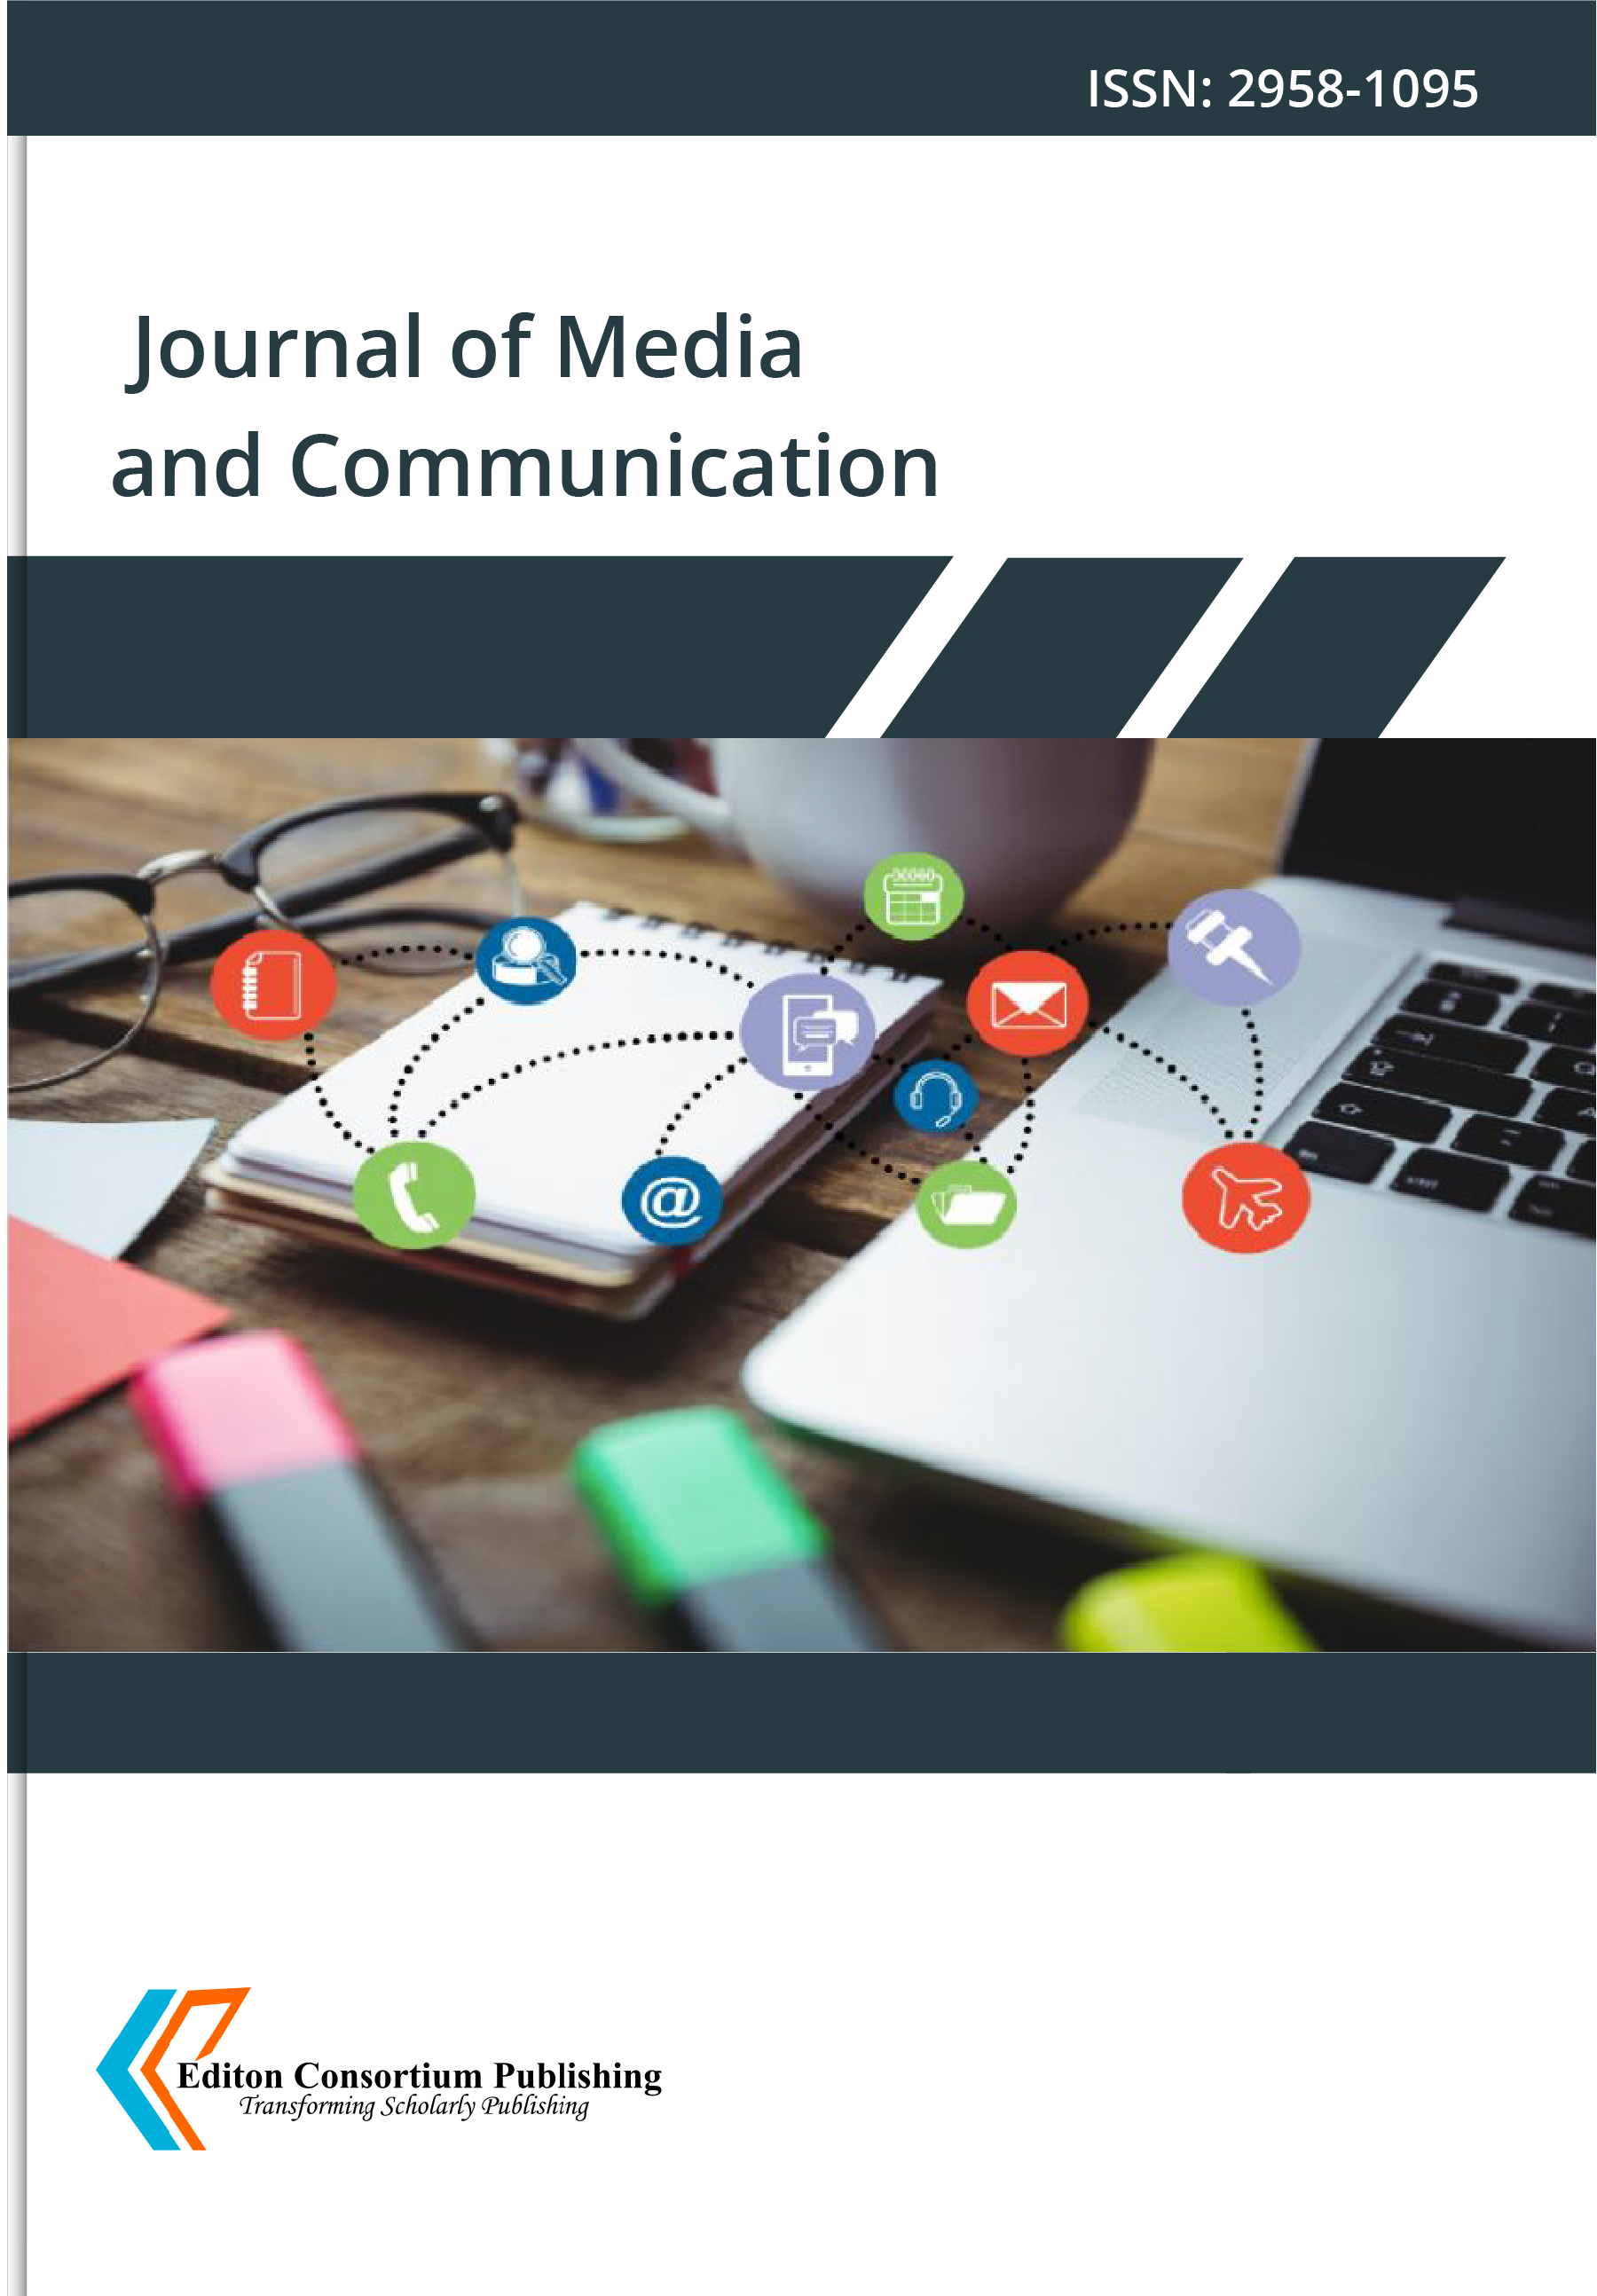  Journal of Media and Communication